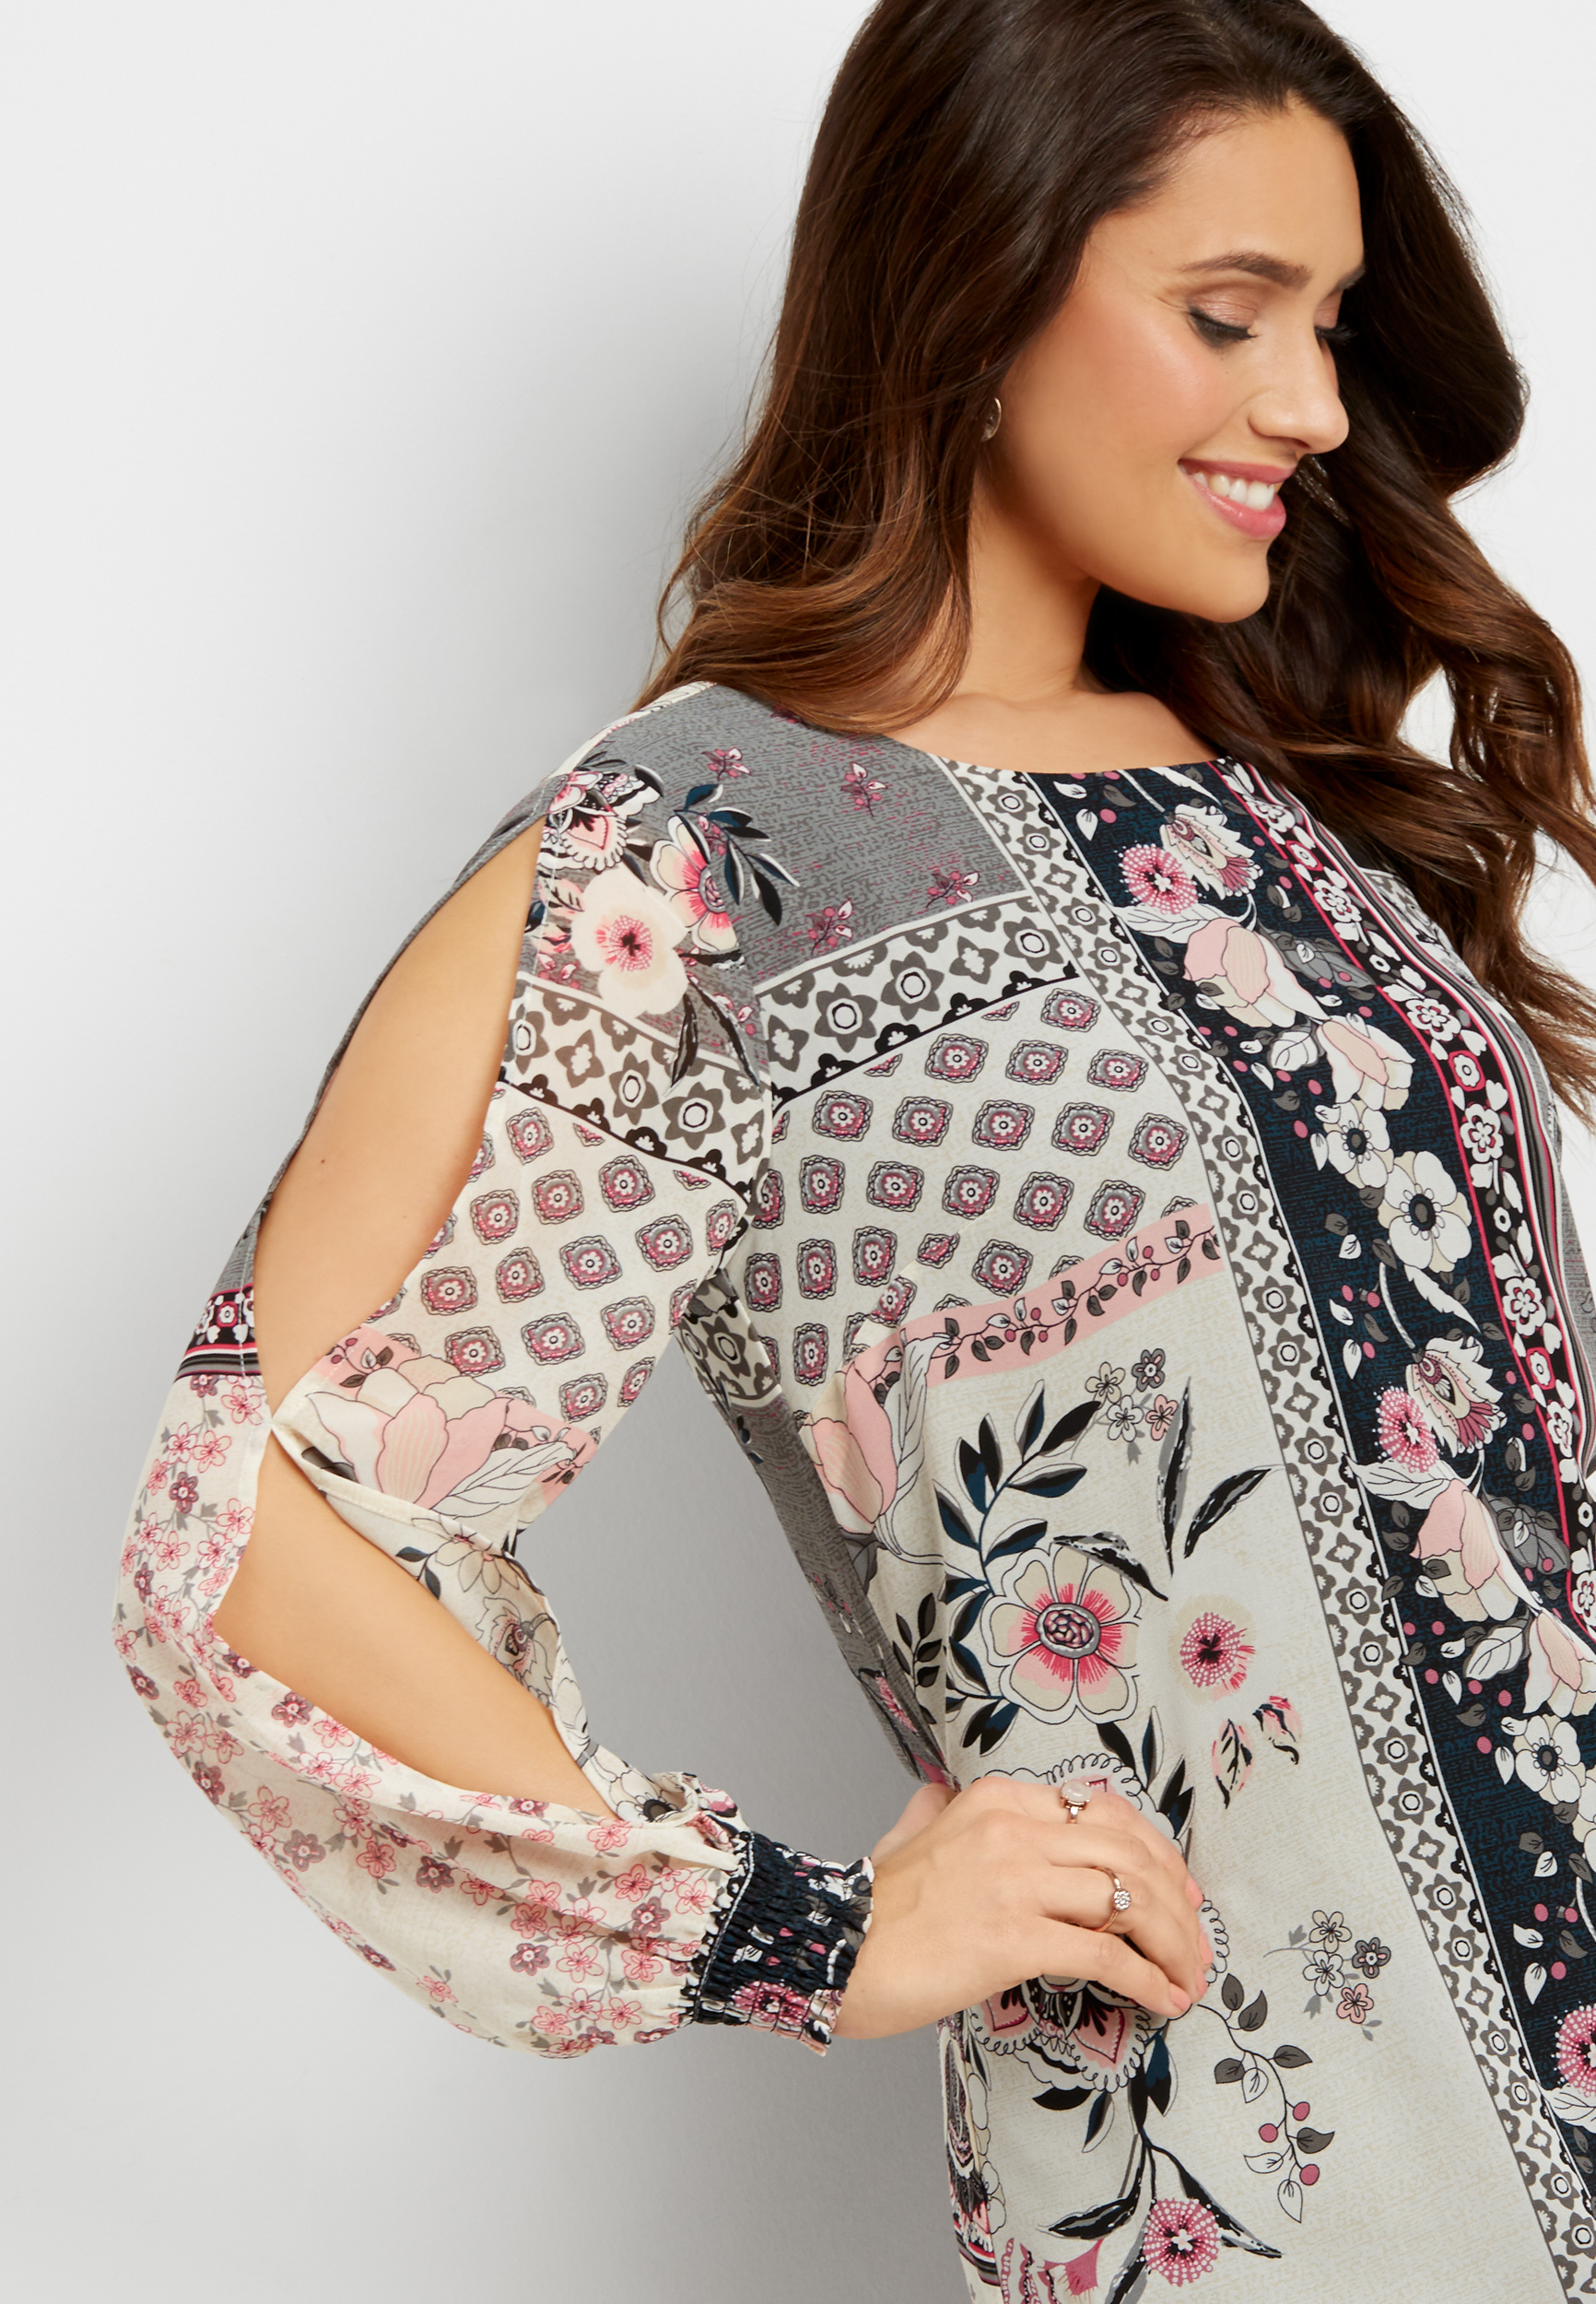 chiffon shift dress in floral bandana print with slit sleeves | maurices